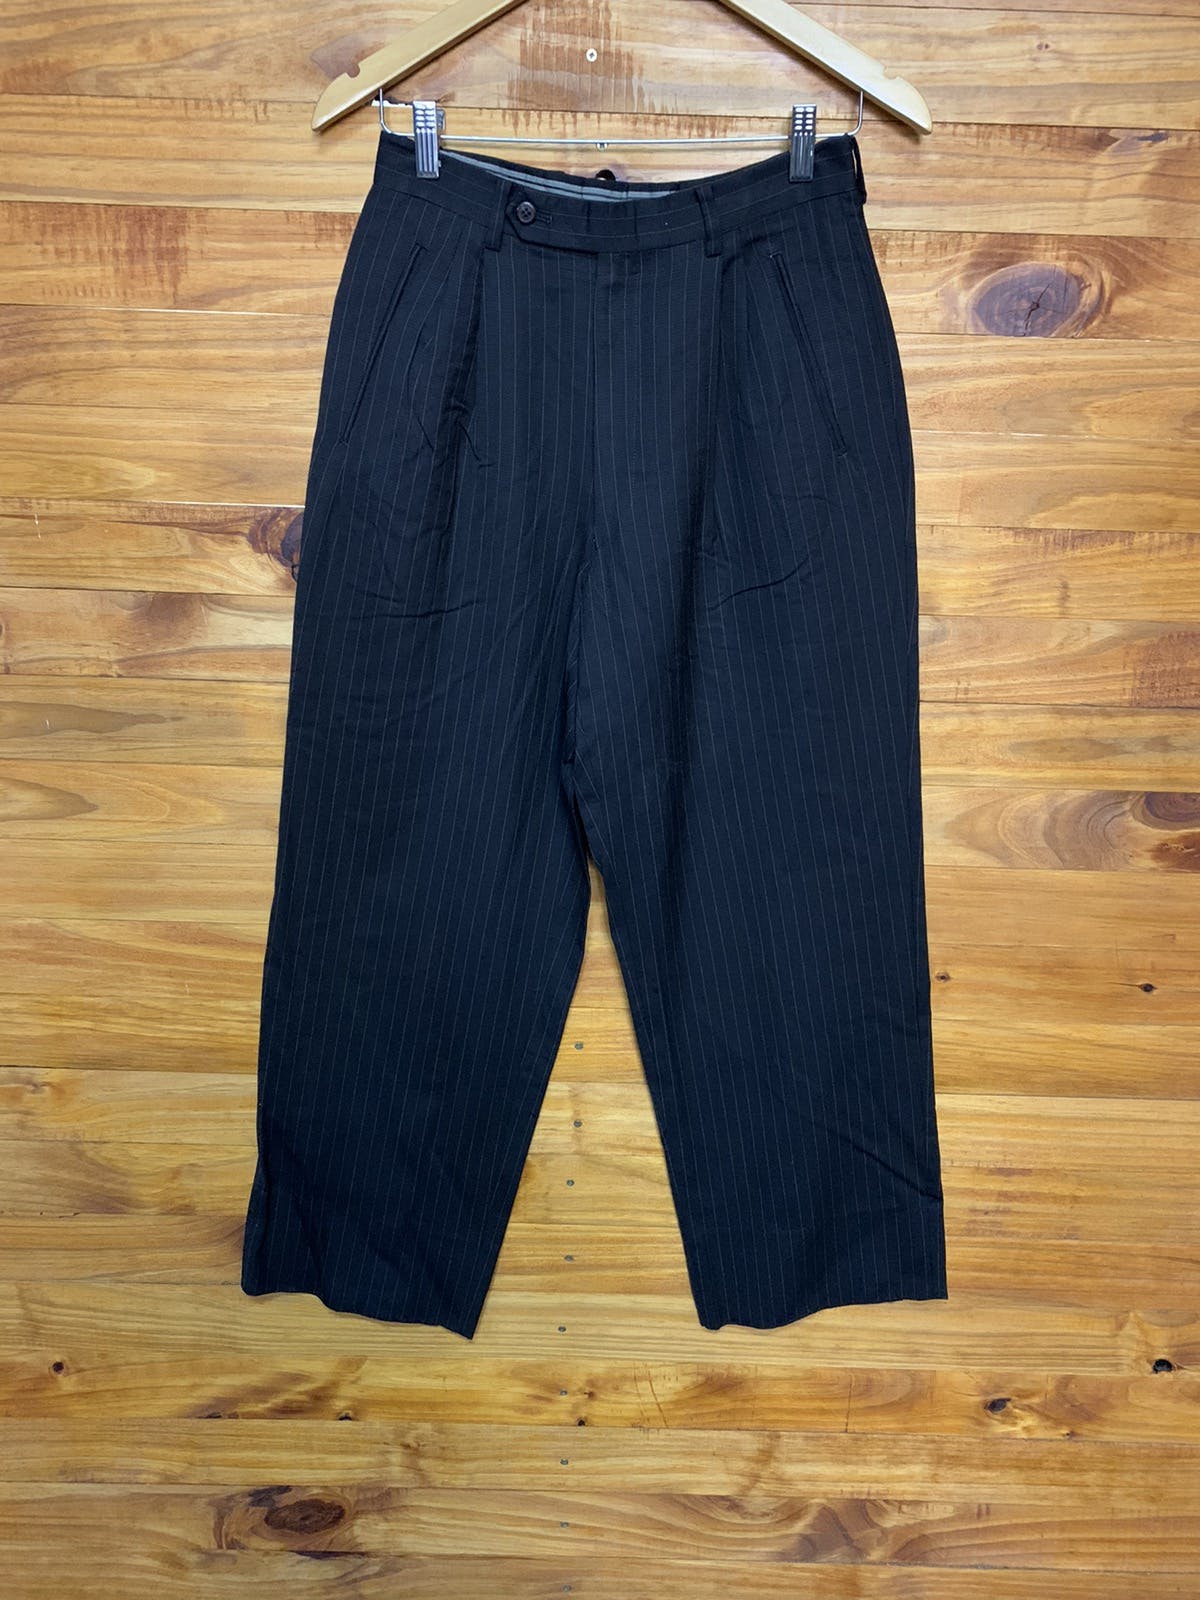 Vintage Moschino Trouser Pants - 1